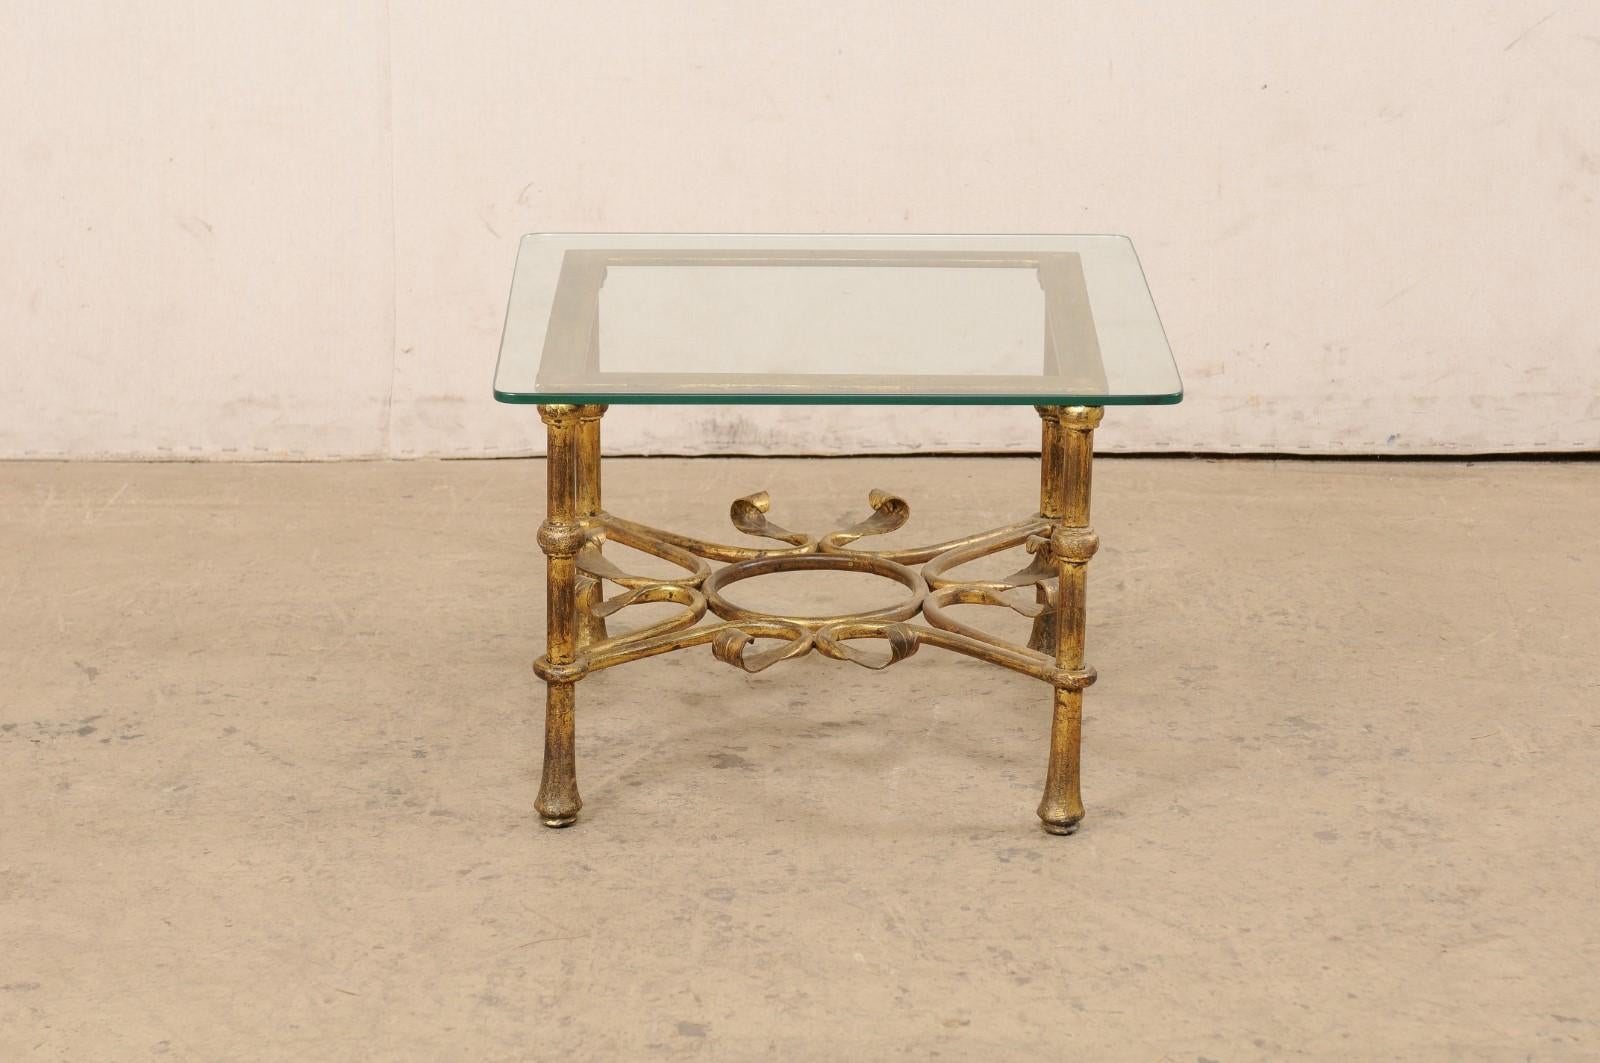 Spanish Accent Table with Gilt Iron Base & Square-Shaped Glass Top, Mid 20th C. For Sale 1